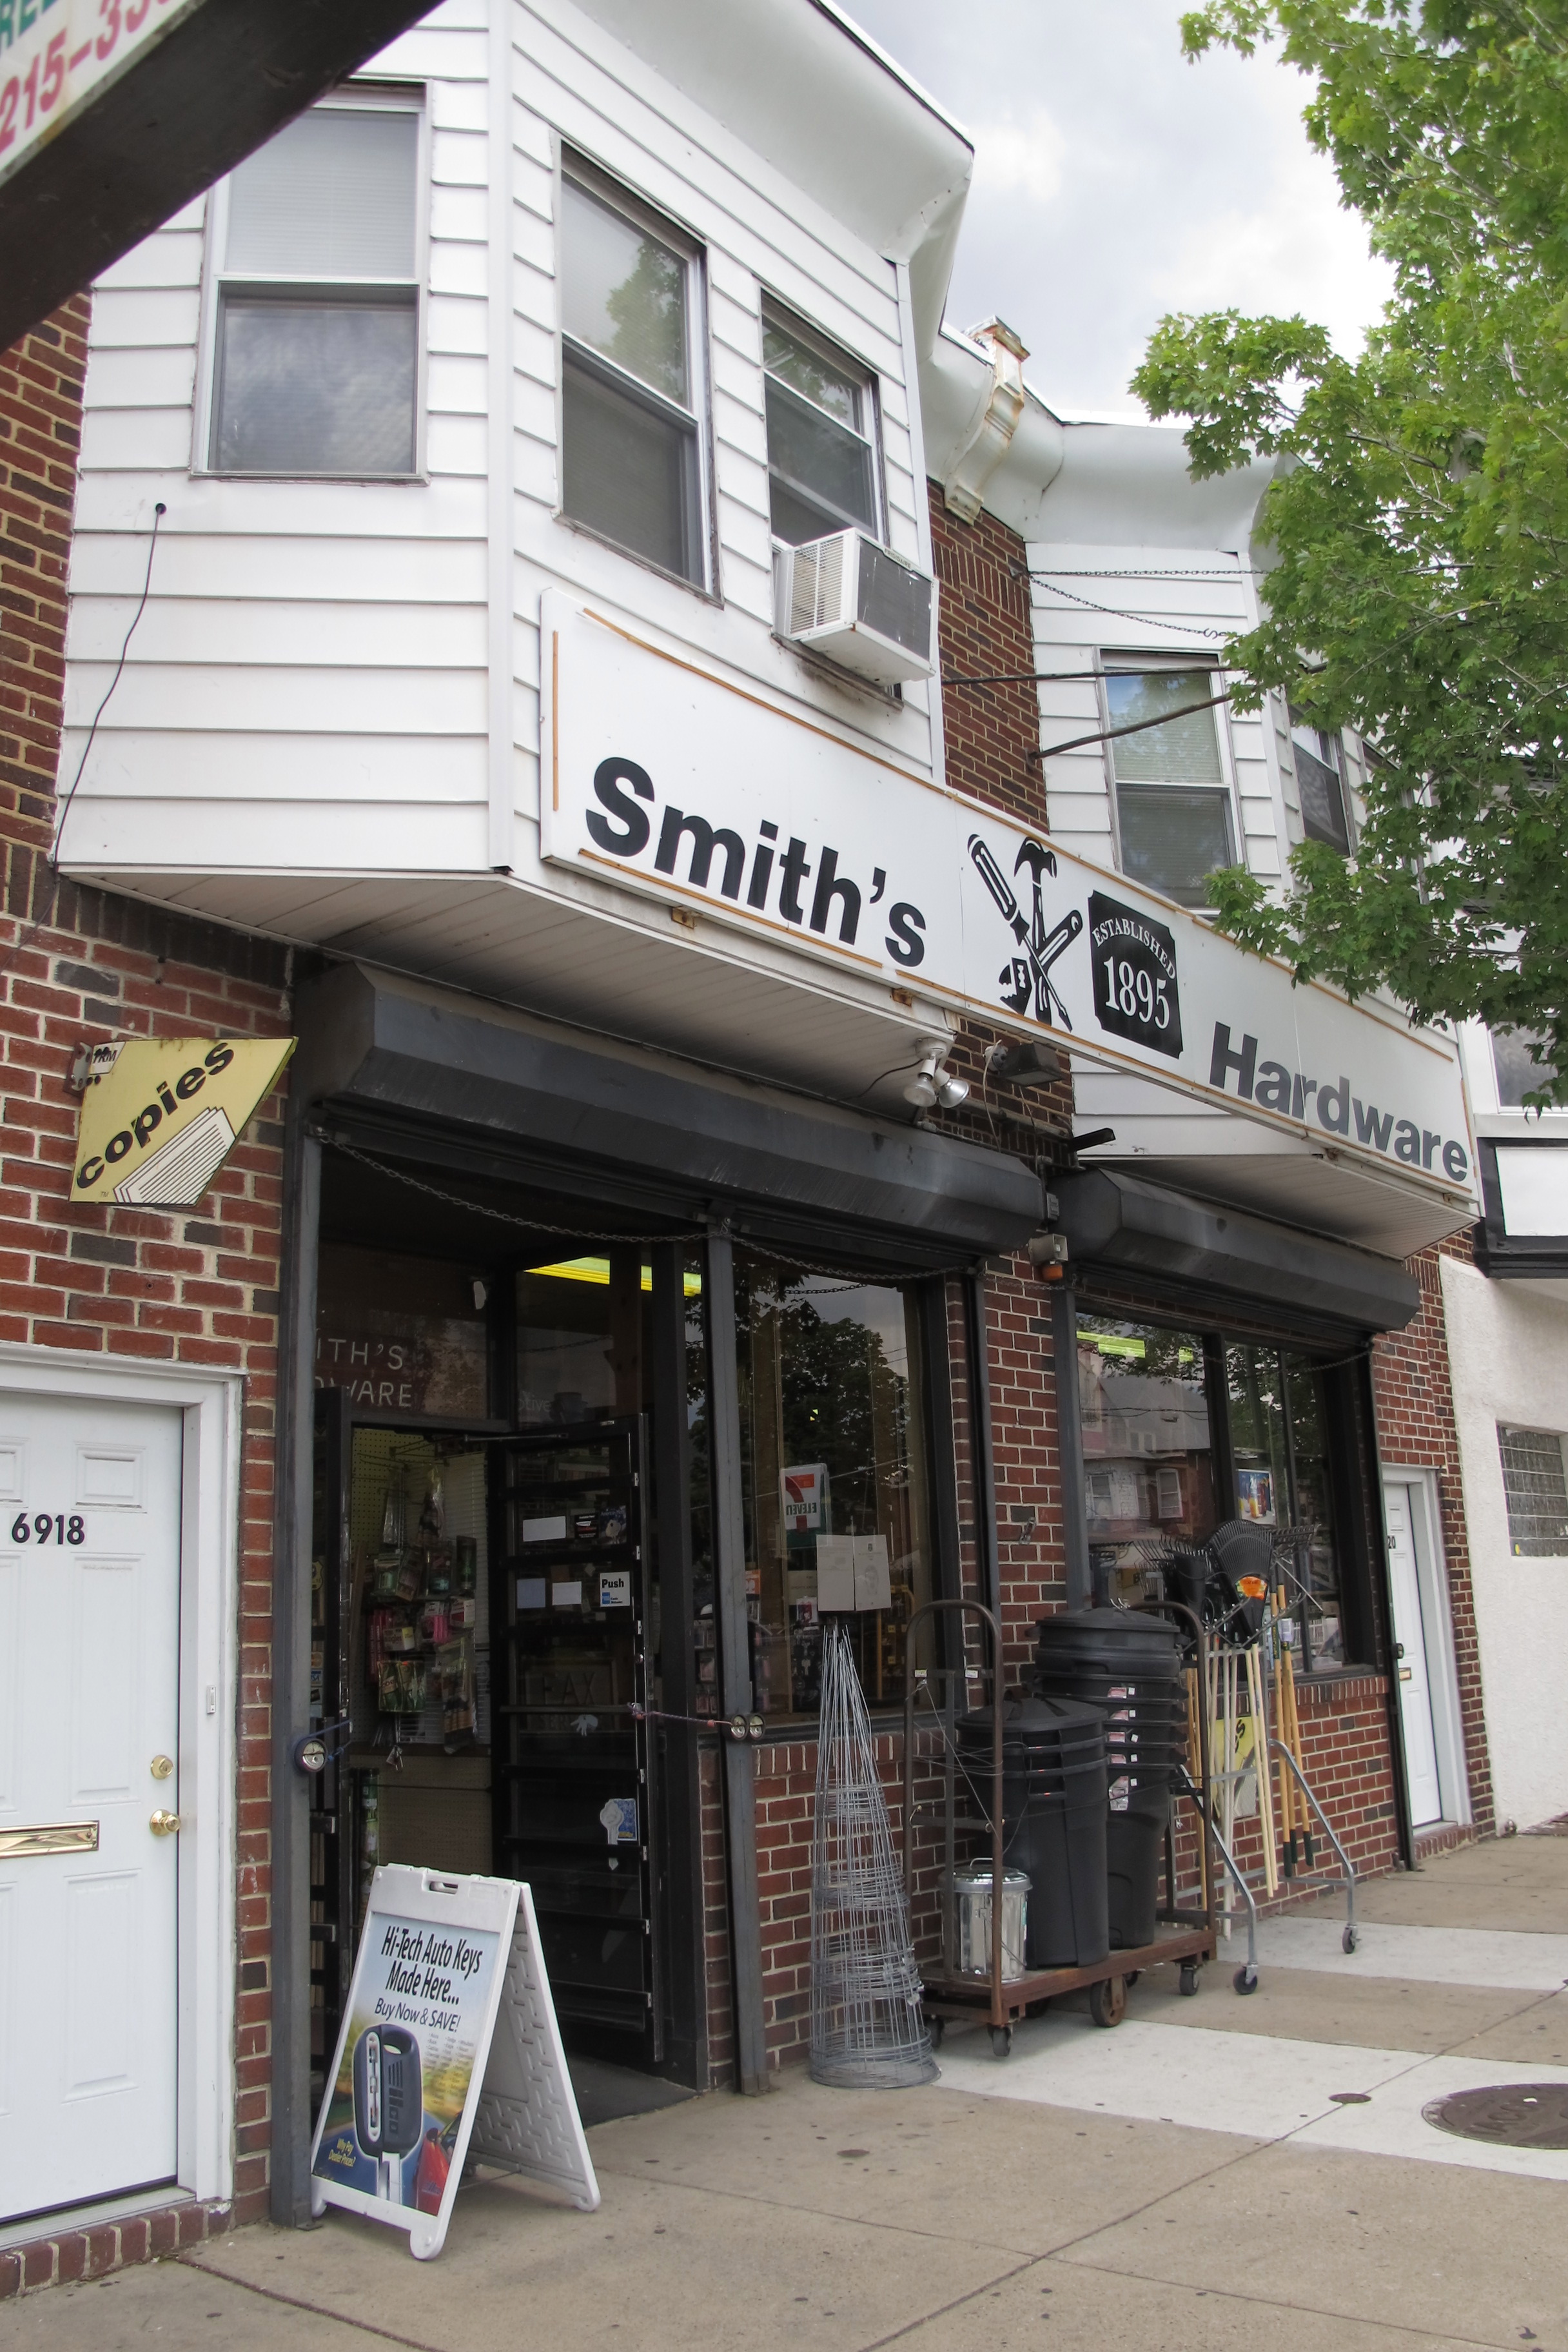 Smiths Hardware (6918 Torresdale) should soon have a new awning and woodwork where there's now siding.